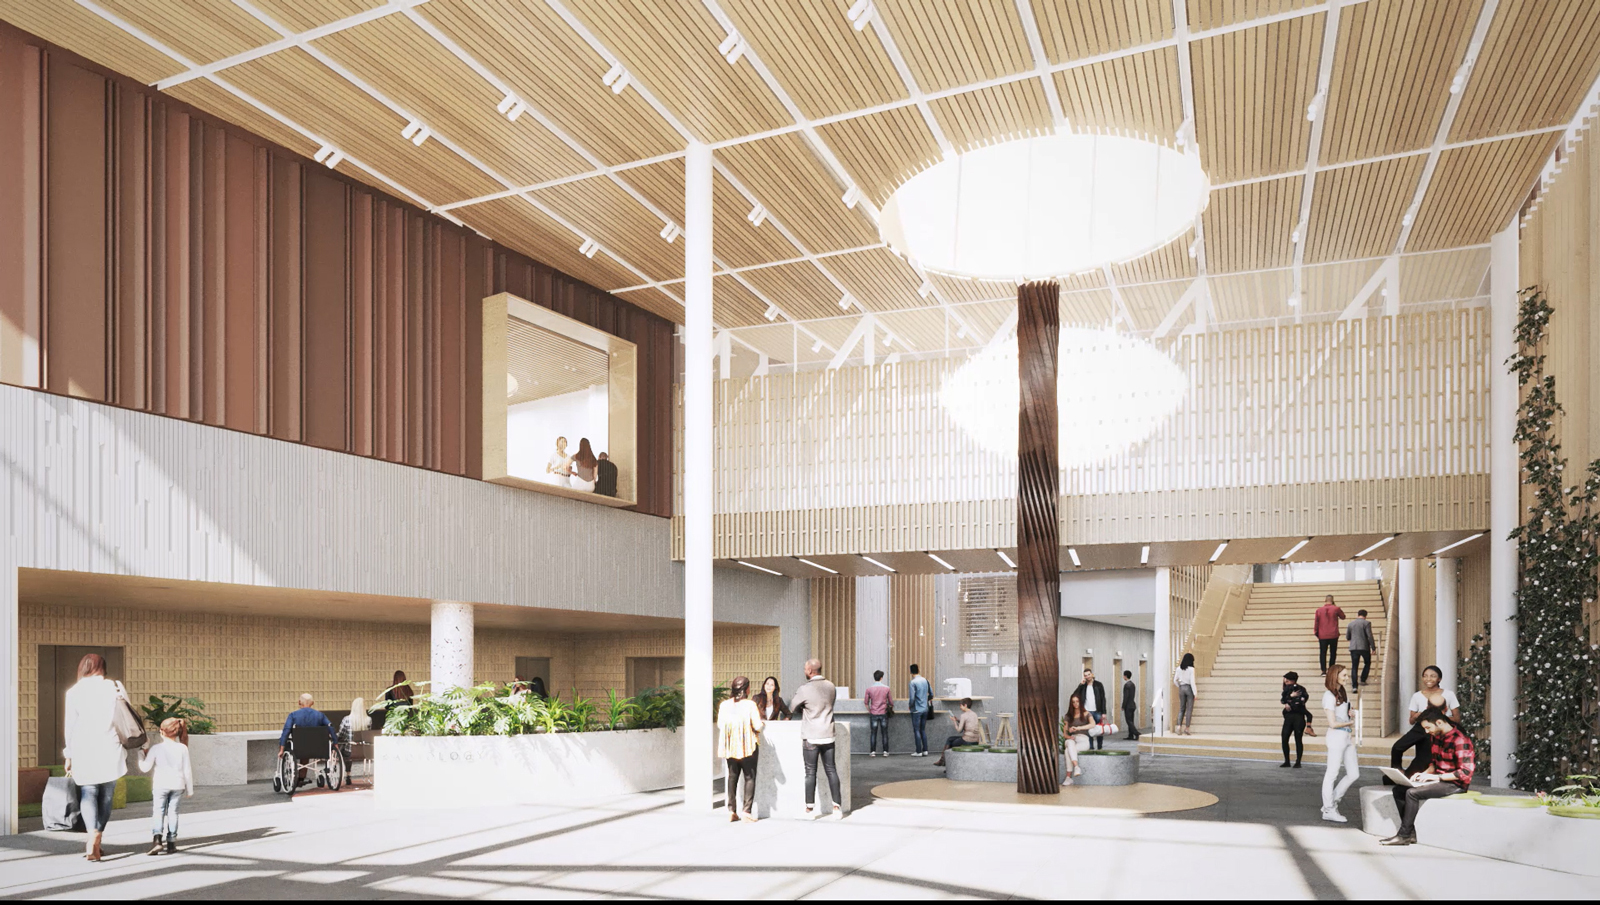 Main Entrance Foyer of the New East Wing building